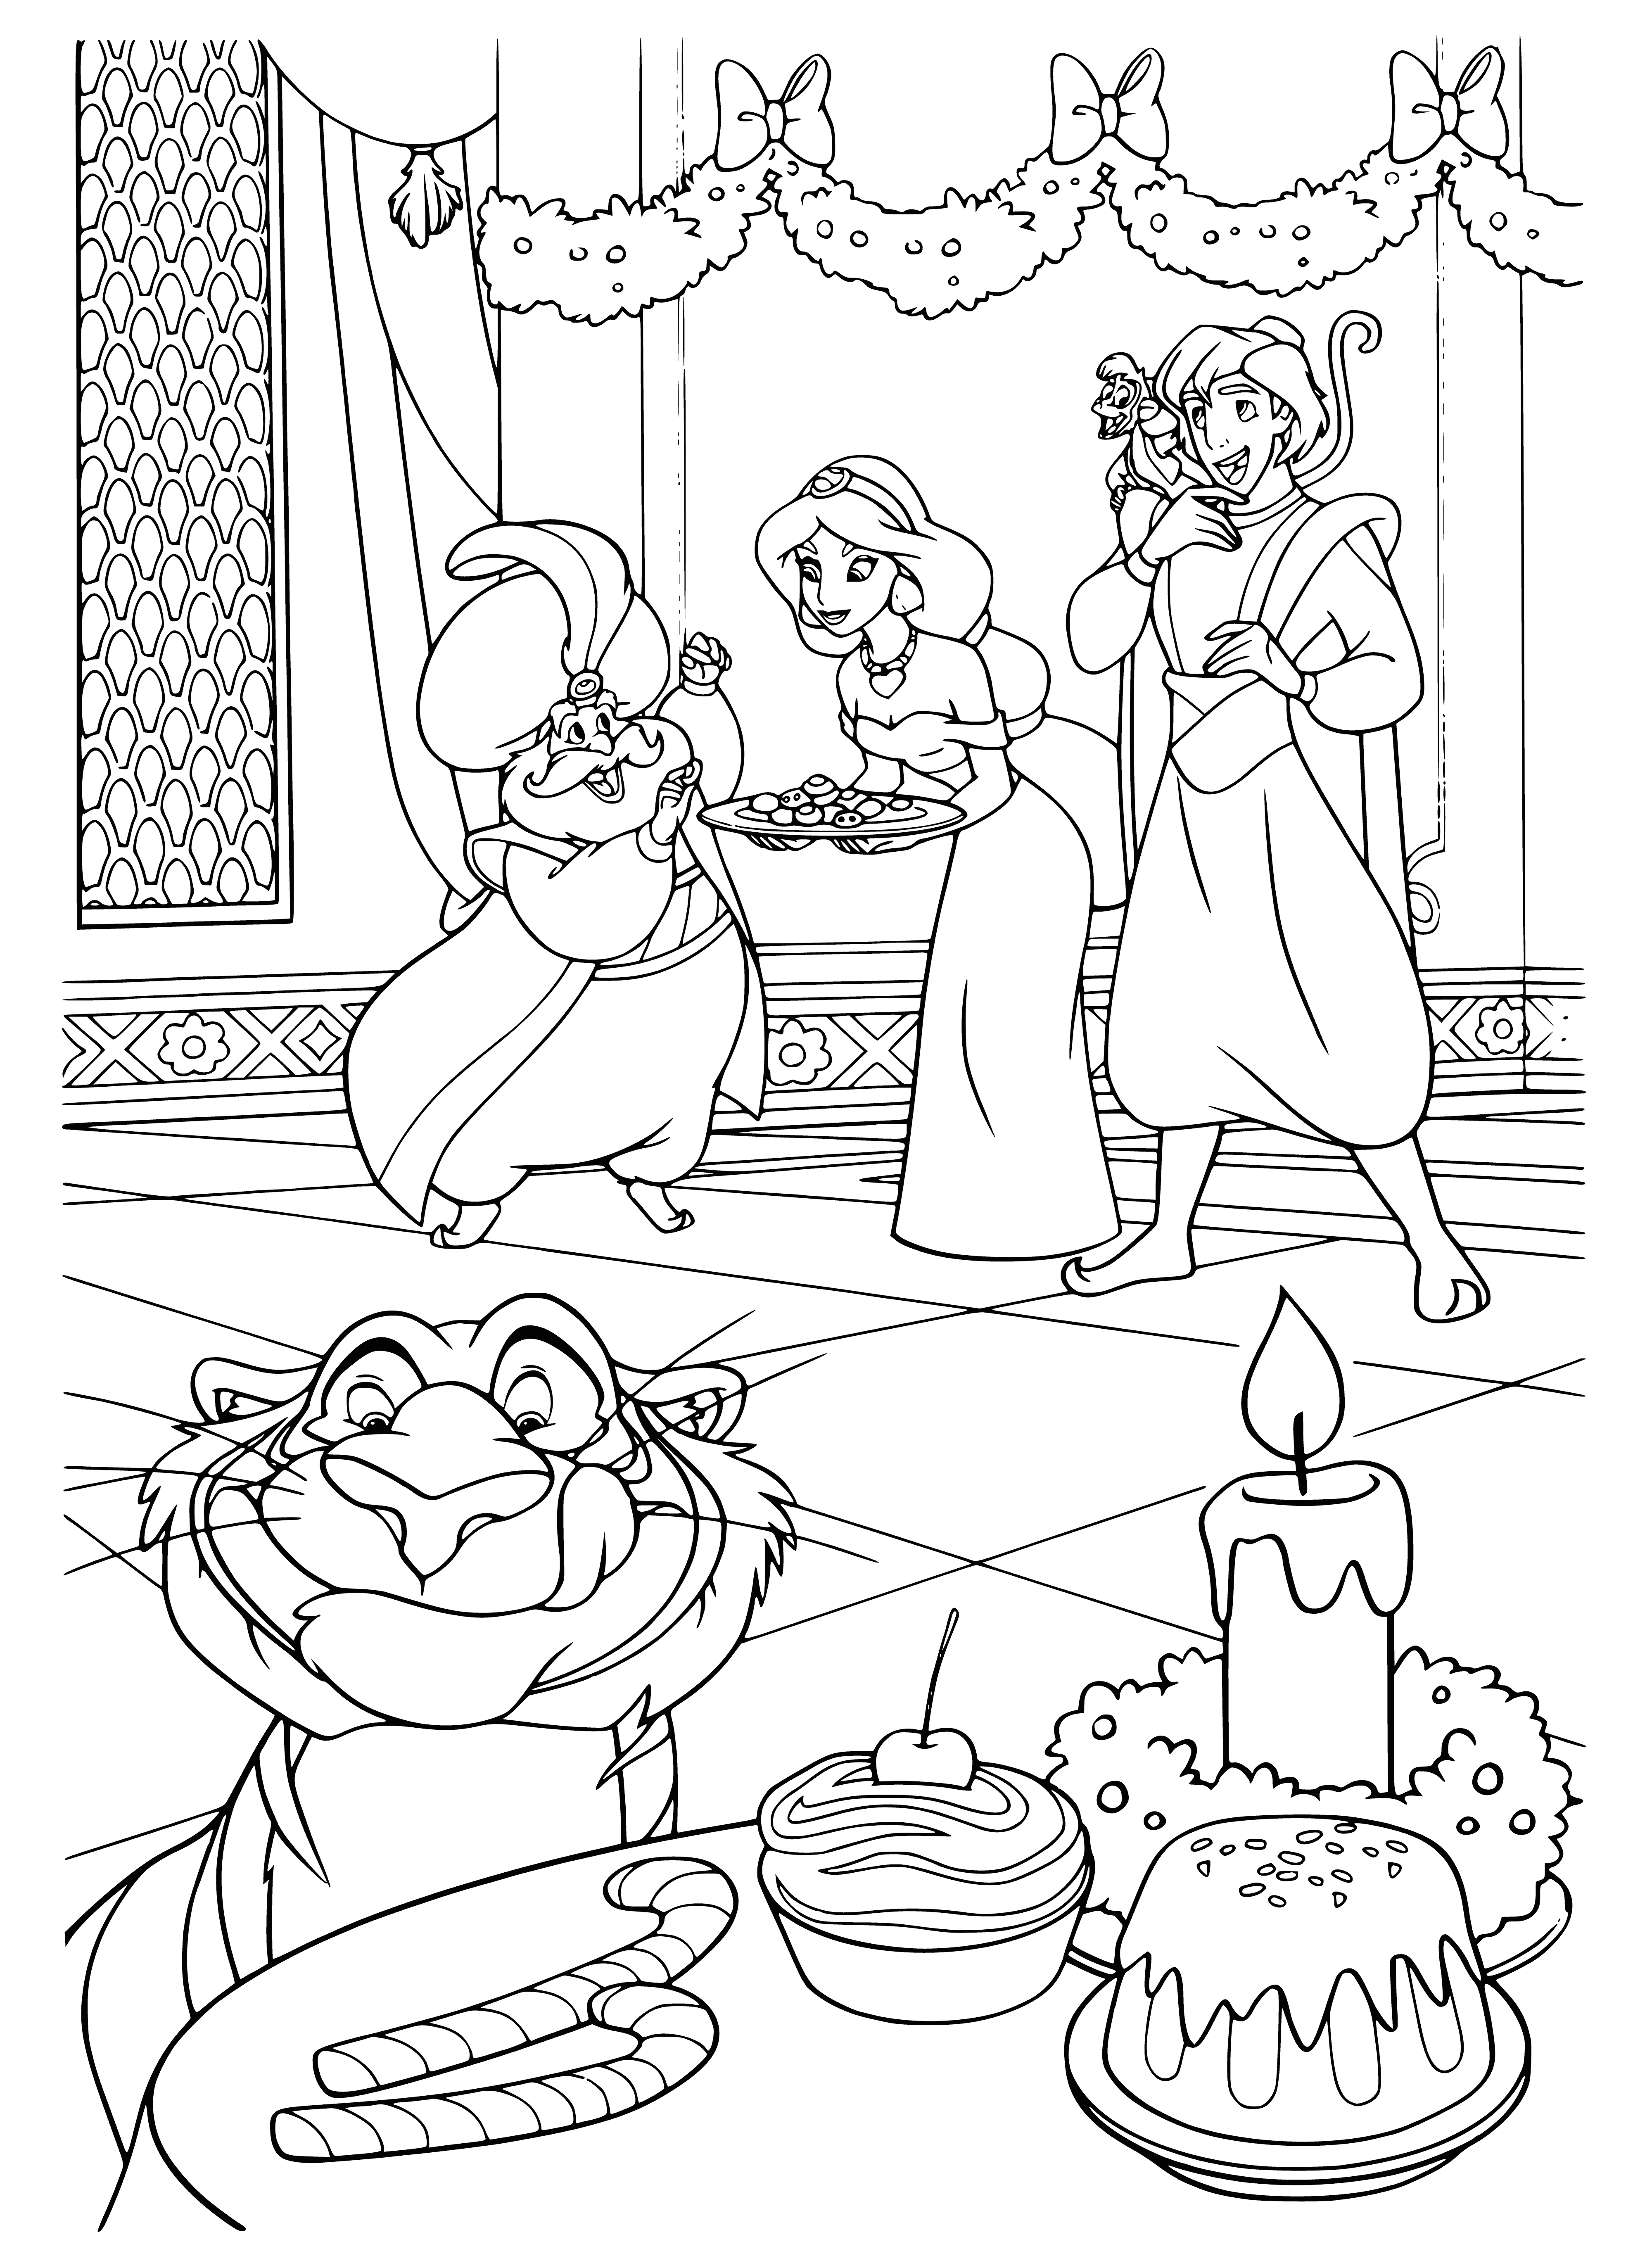 In a palace coloring page